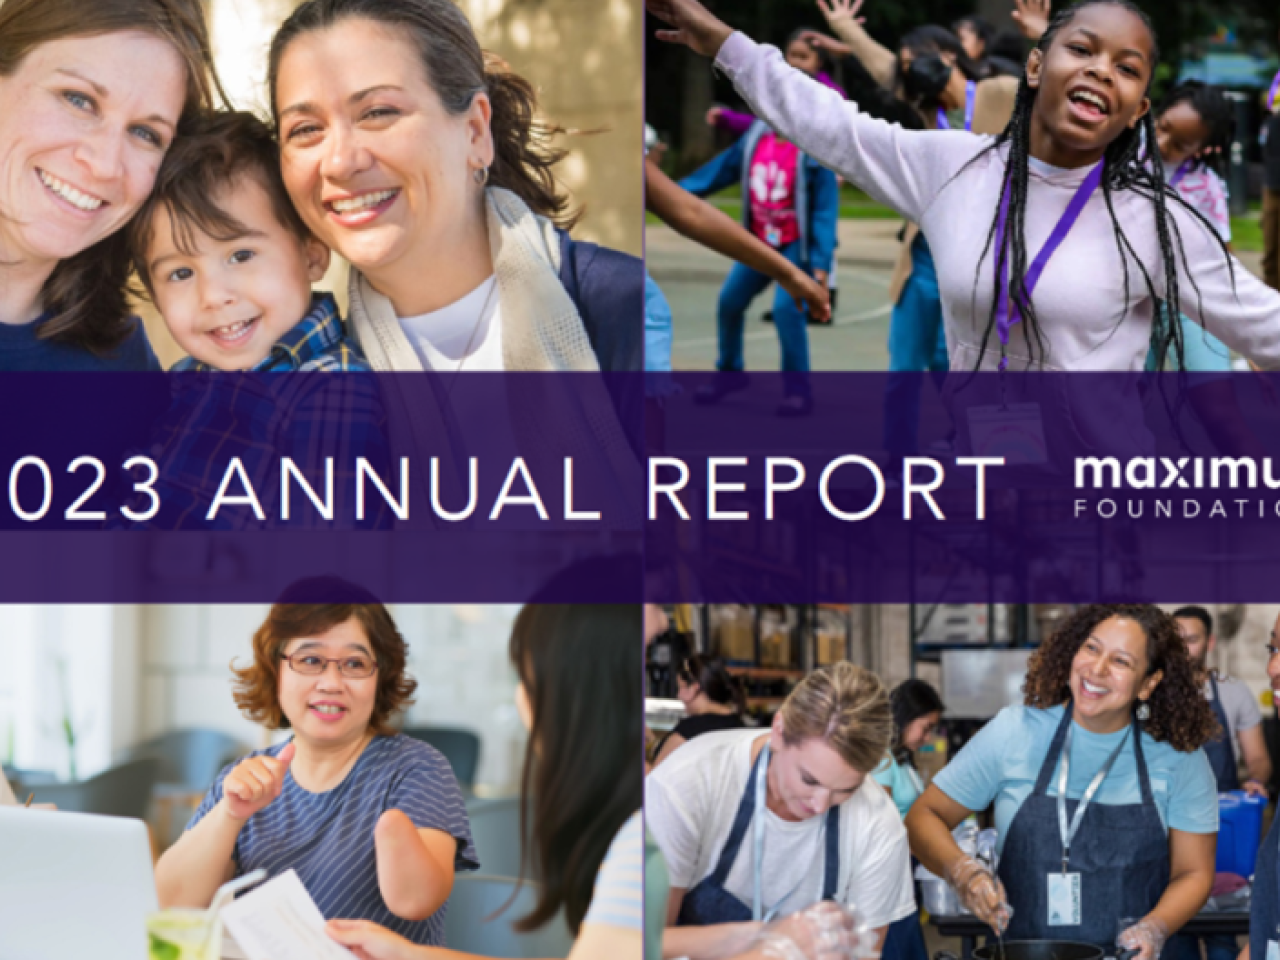 "2023 Annual Report" collage of different people and families.